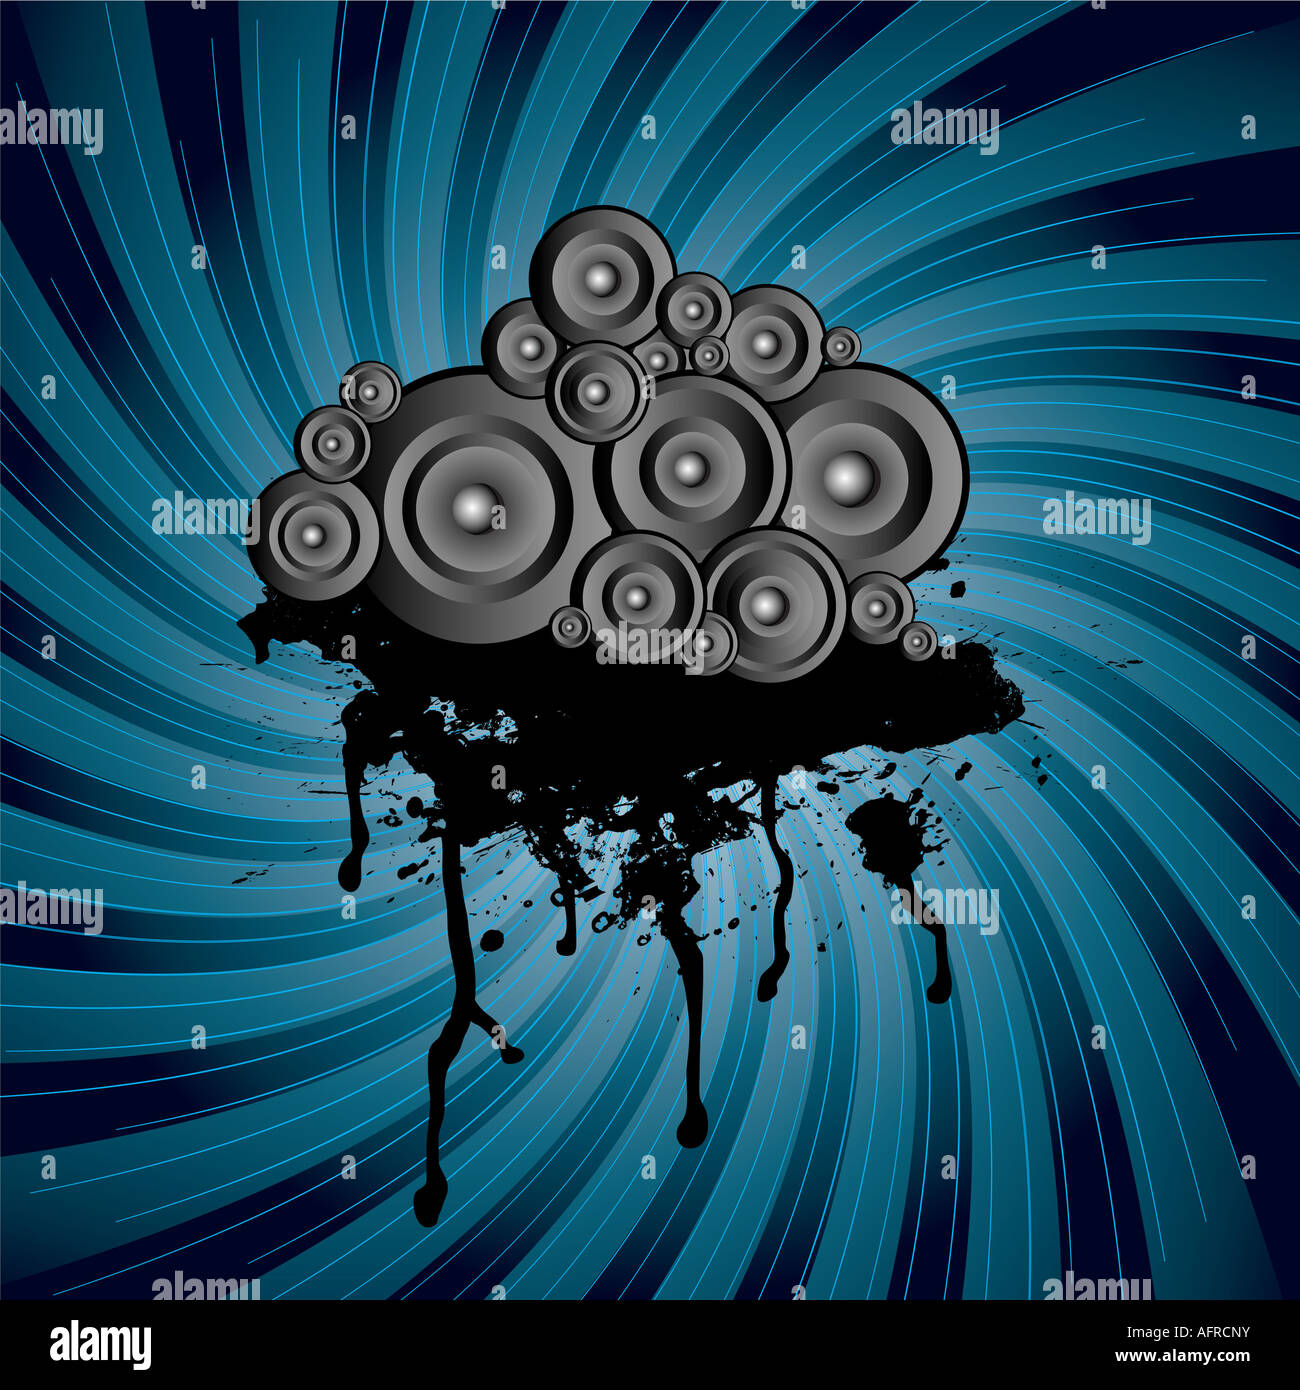 Stack of speakers on top of an ink splat or blood dribble Stock Photo -  Alamy